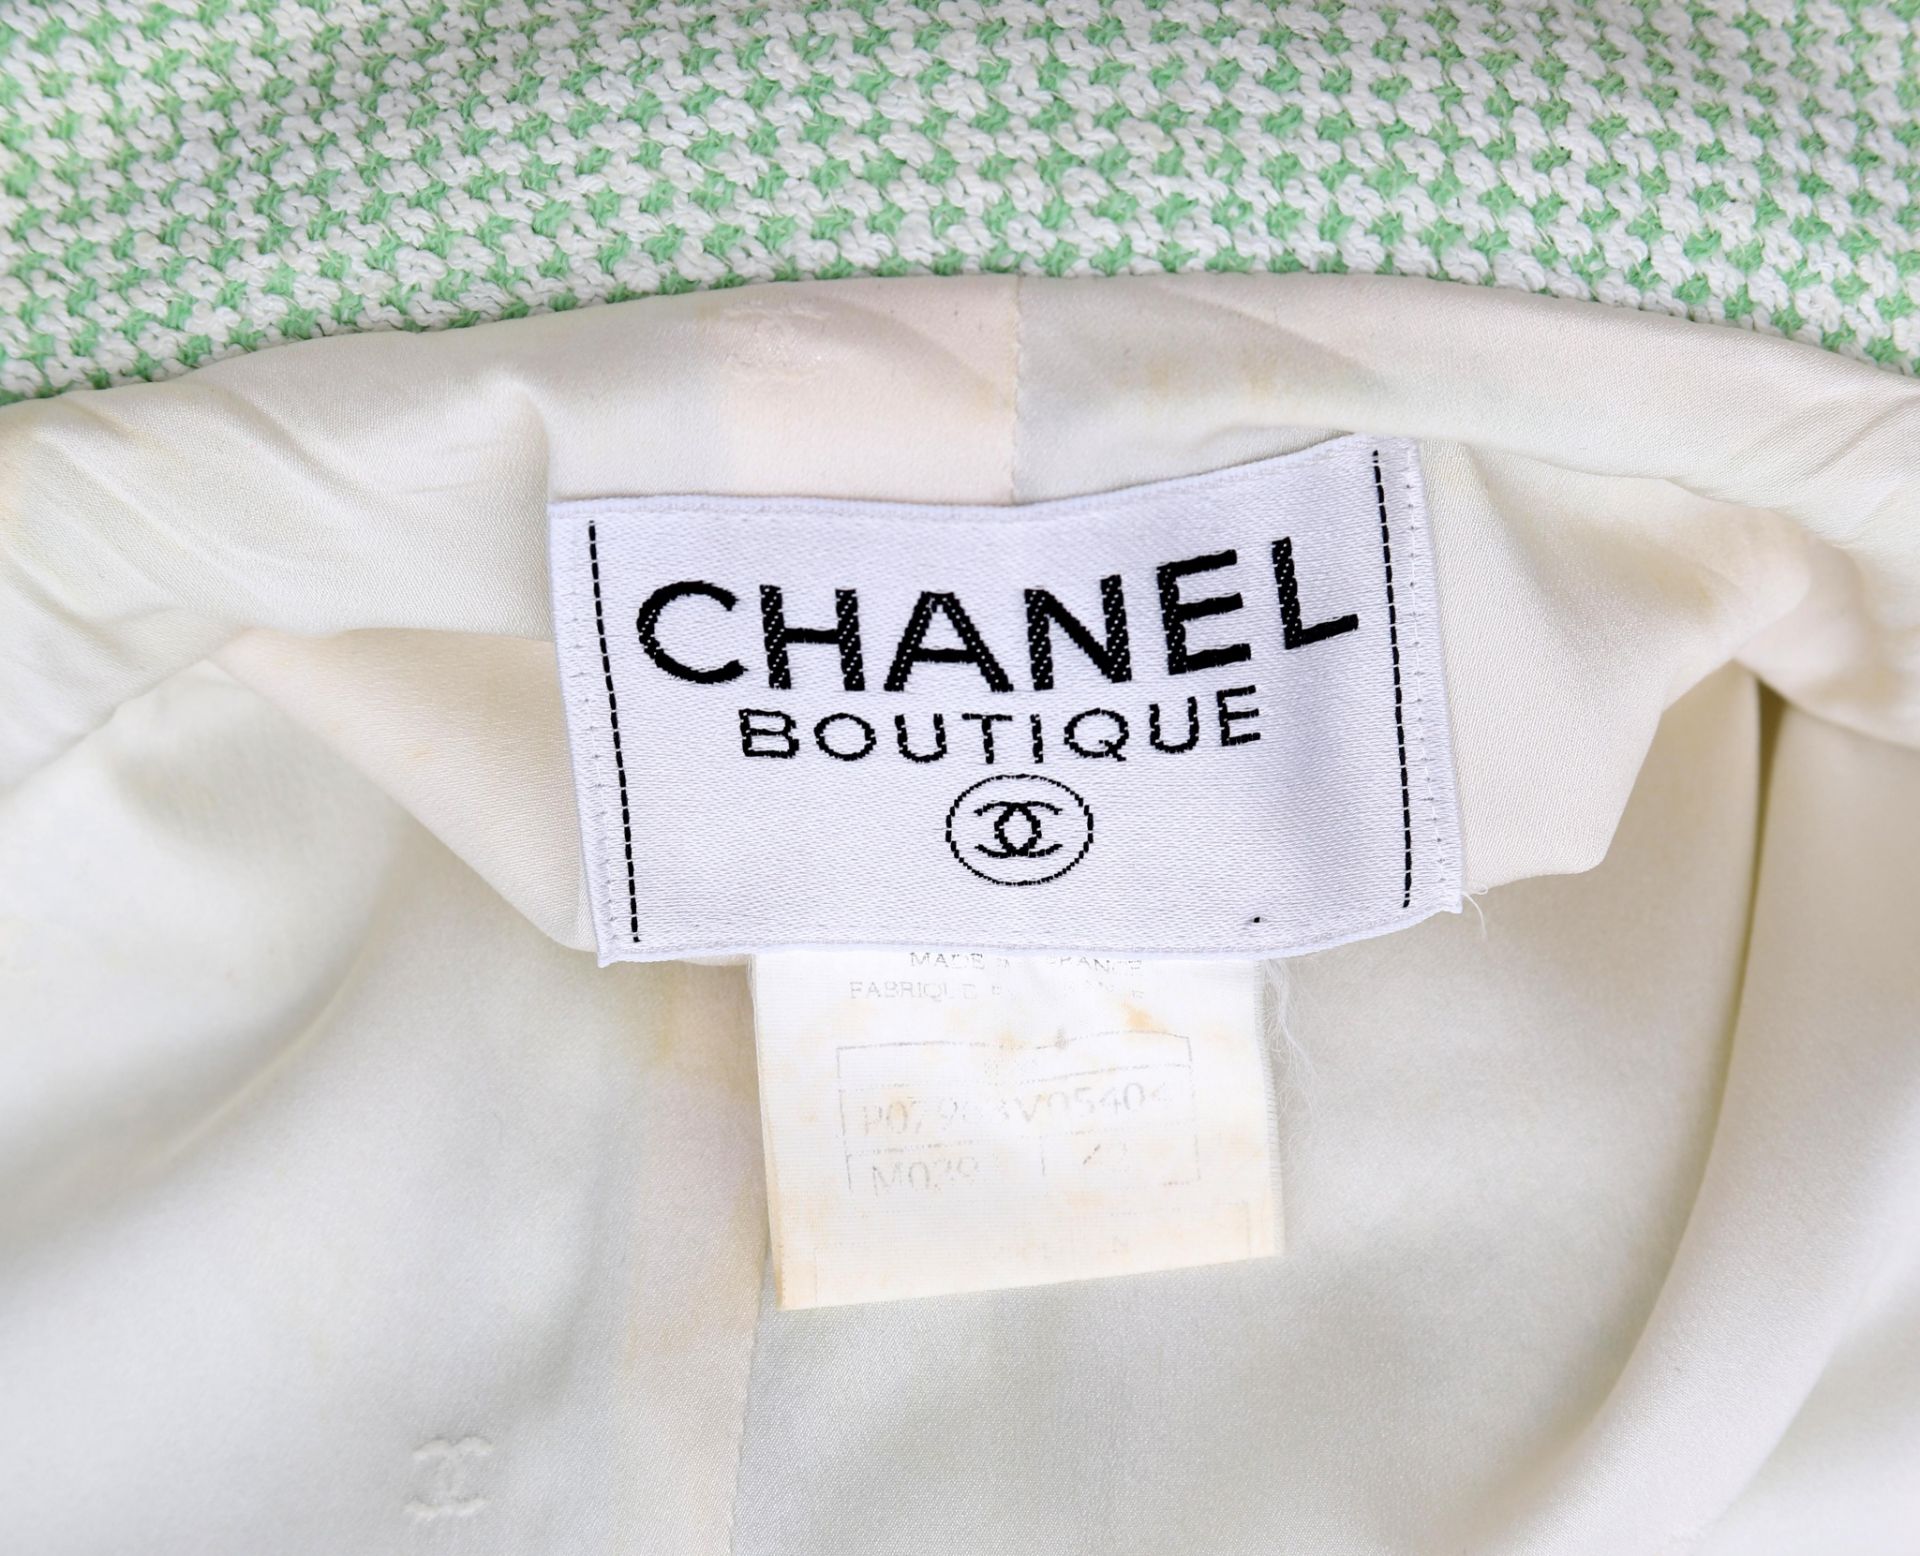 A Chanel Boutique ensamble a green and white mixed blazer and a skirt. The blazer has a reverse - Image 4 of 9